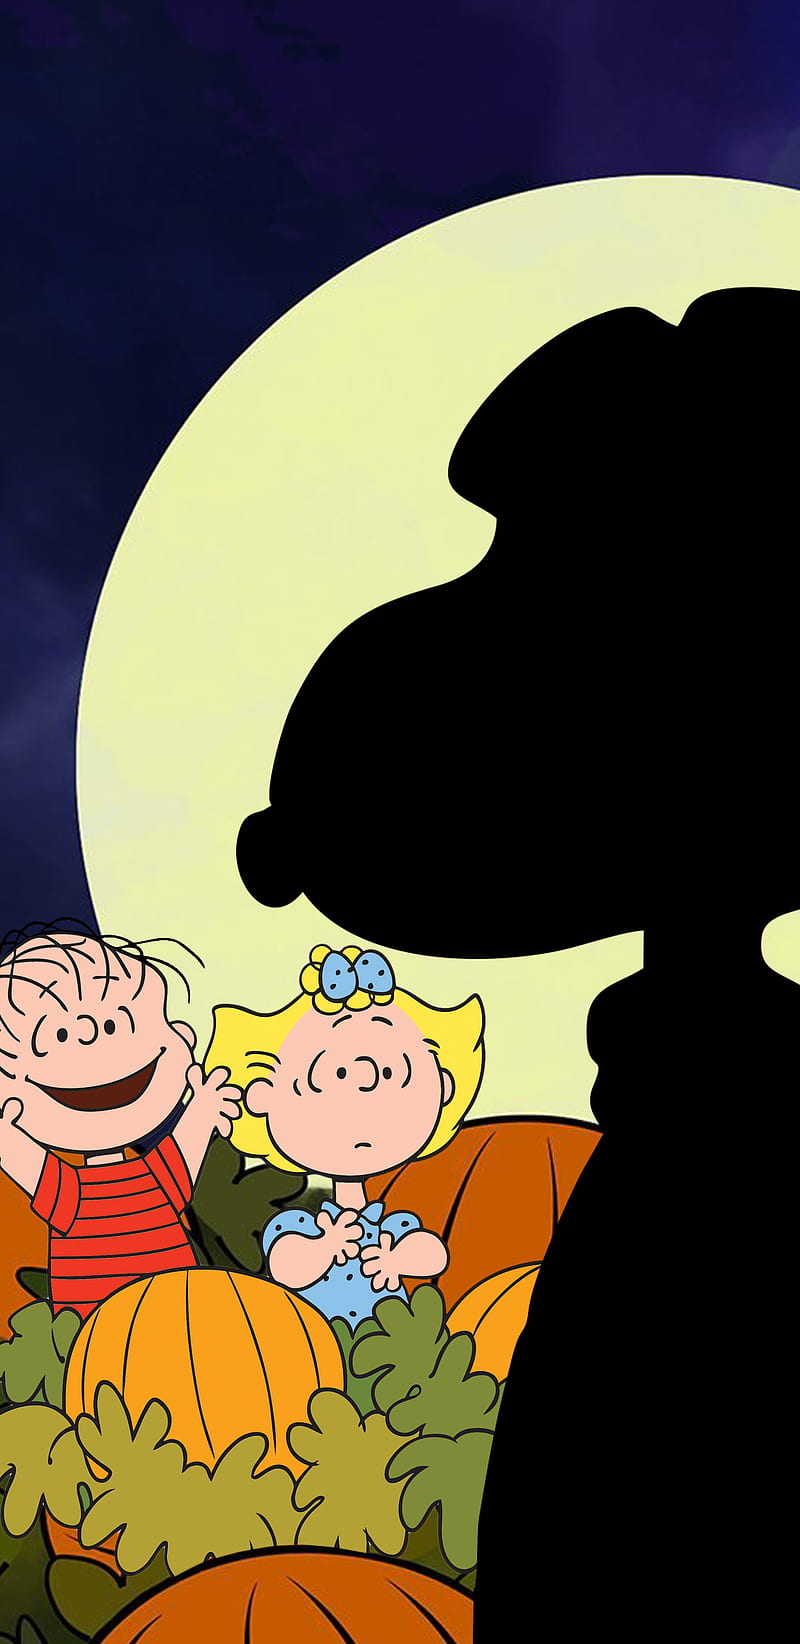 Wallpaper ID 419371  TV Show The Snoopy Show Phone Wallpaper Snoopy  828x1792 free download